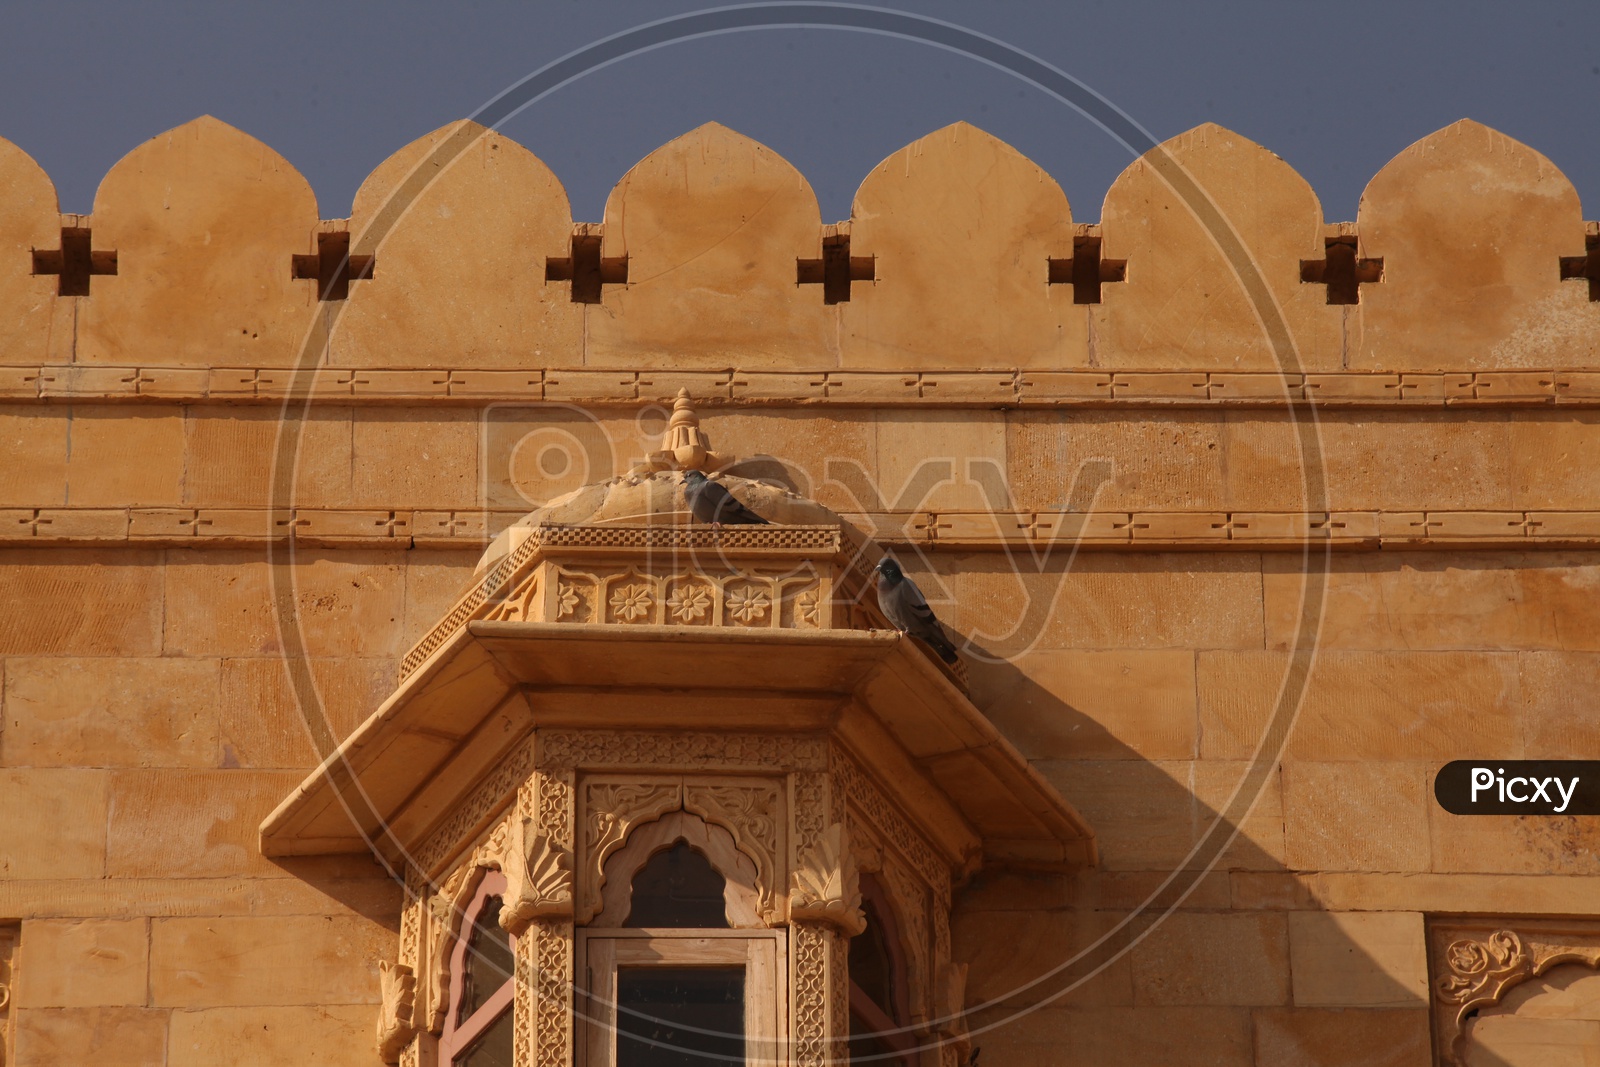 Historic architecture of Rajasthan